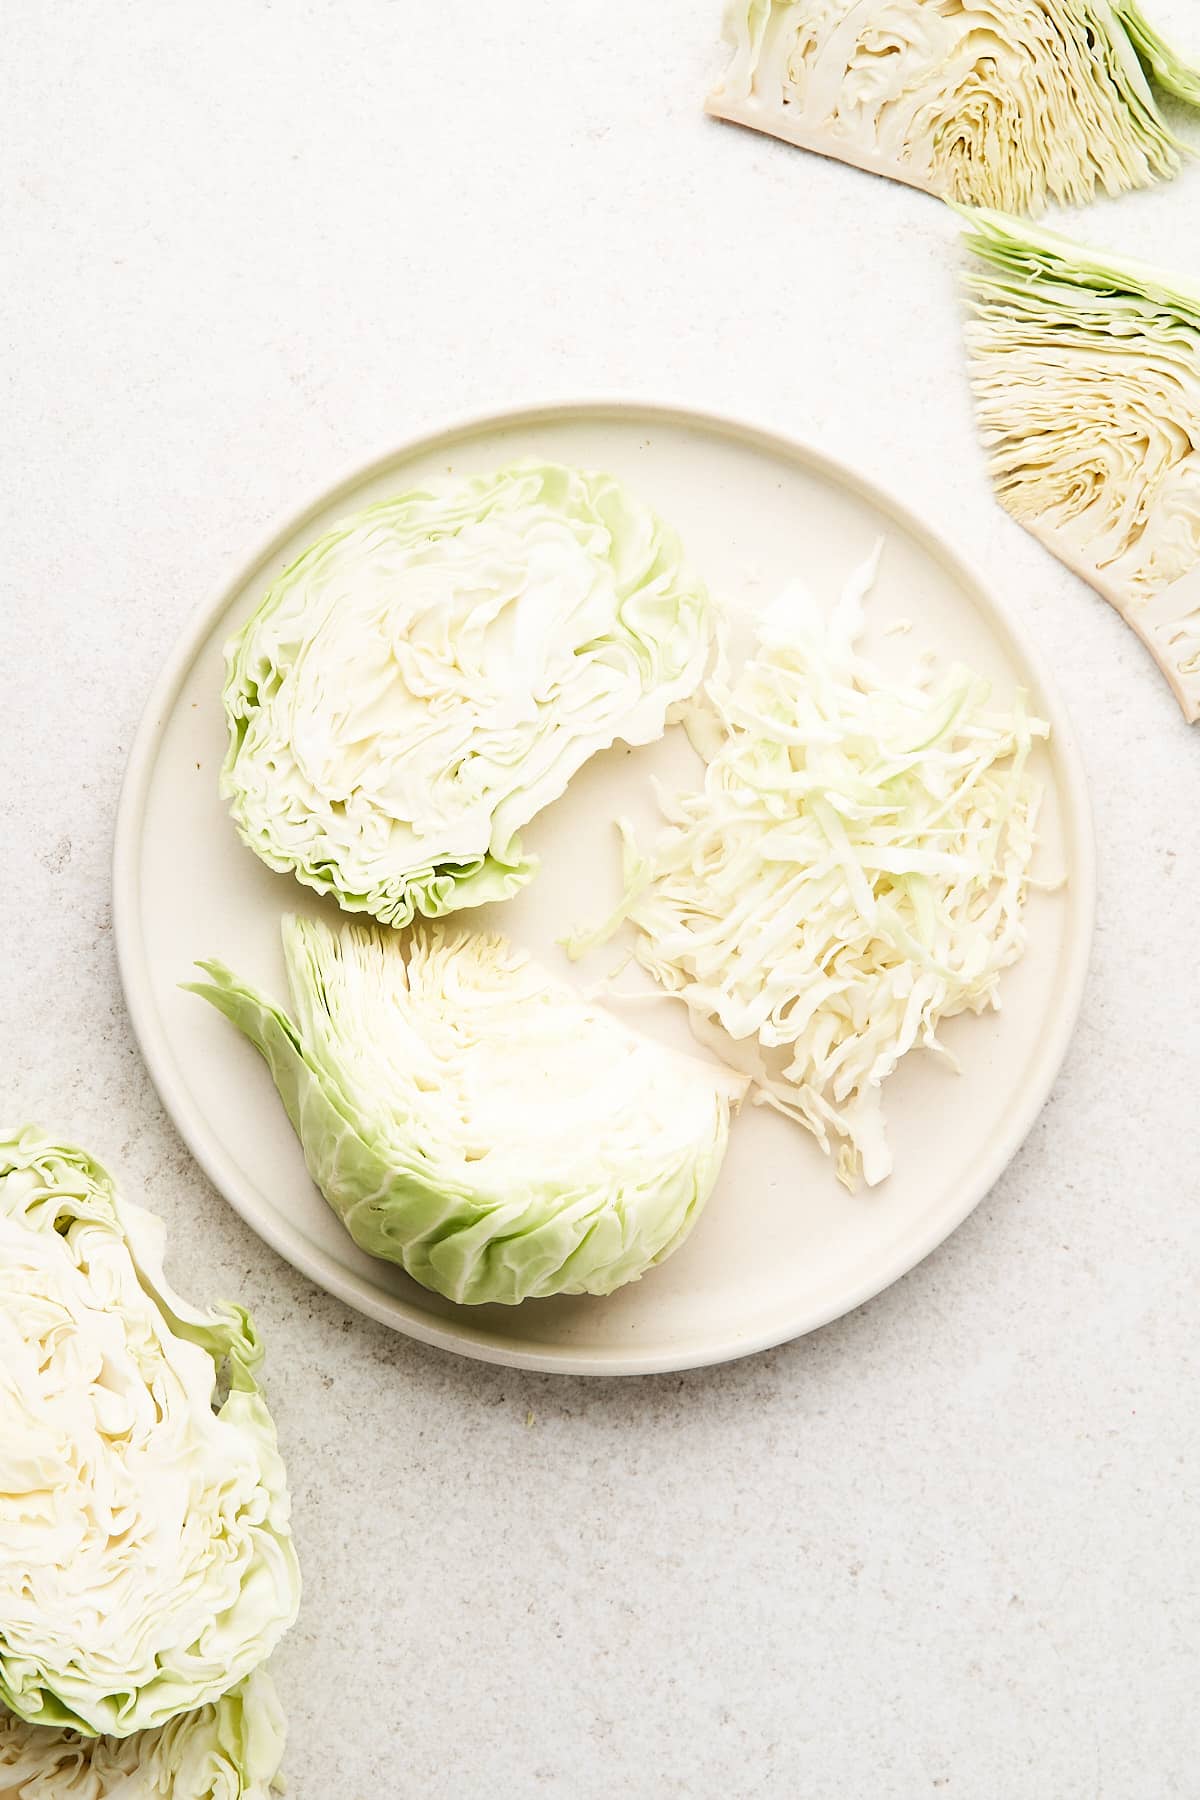 Various cuts of cabbage on a plate.